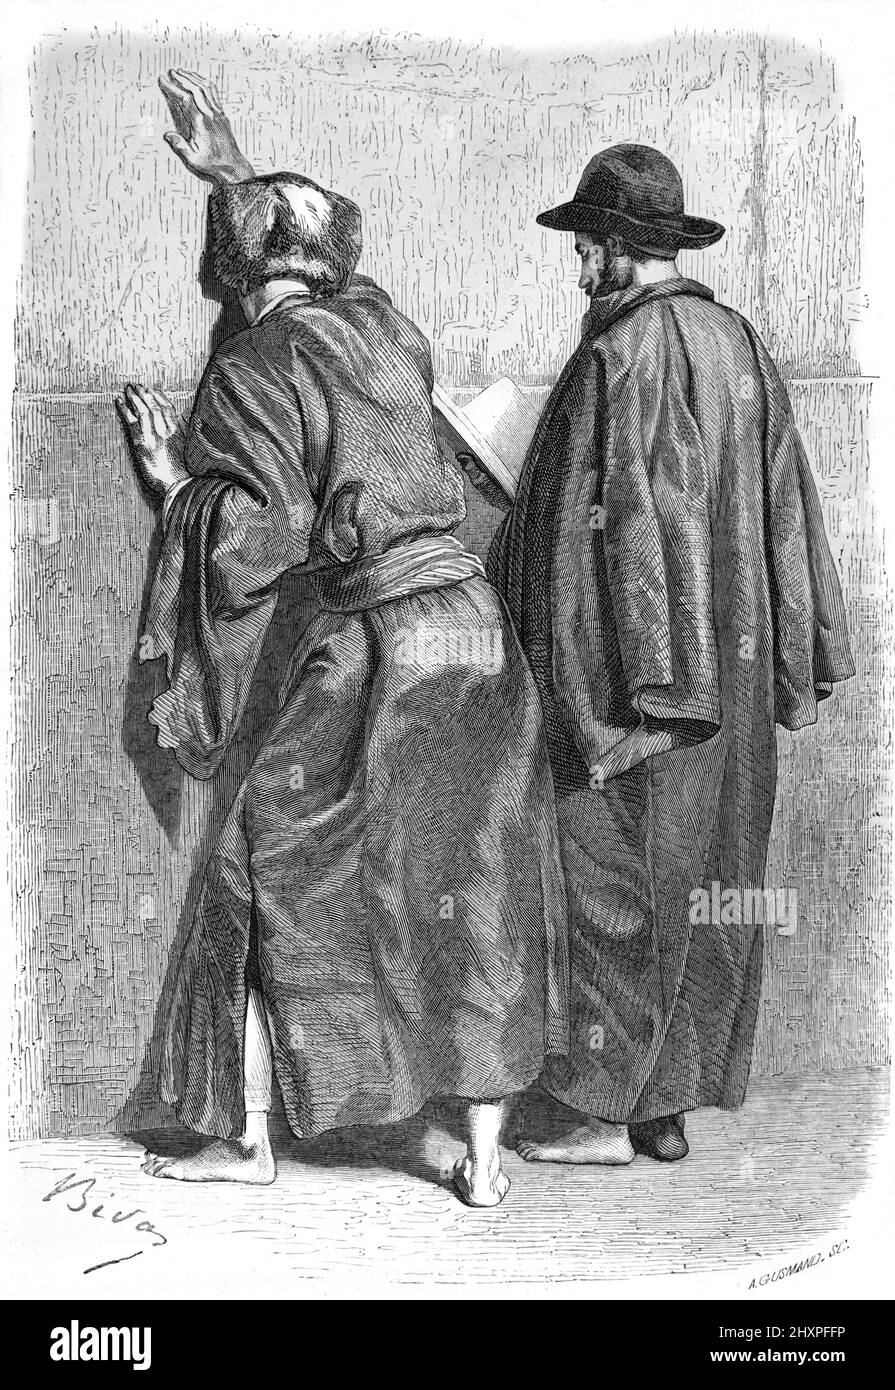 Orthodox Jews Pray at the Wailing Wall or Western Wall in the Old City Jerusalem Israel. Vintage Illustration or Engraving 1860. Stock Photo